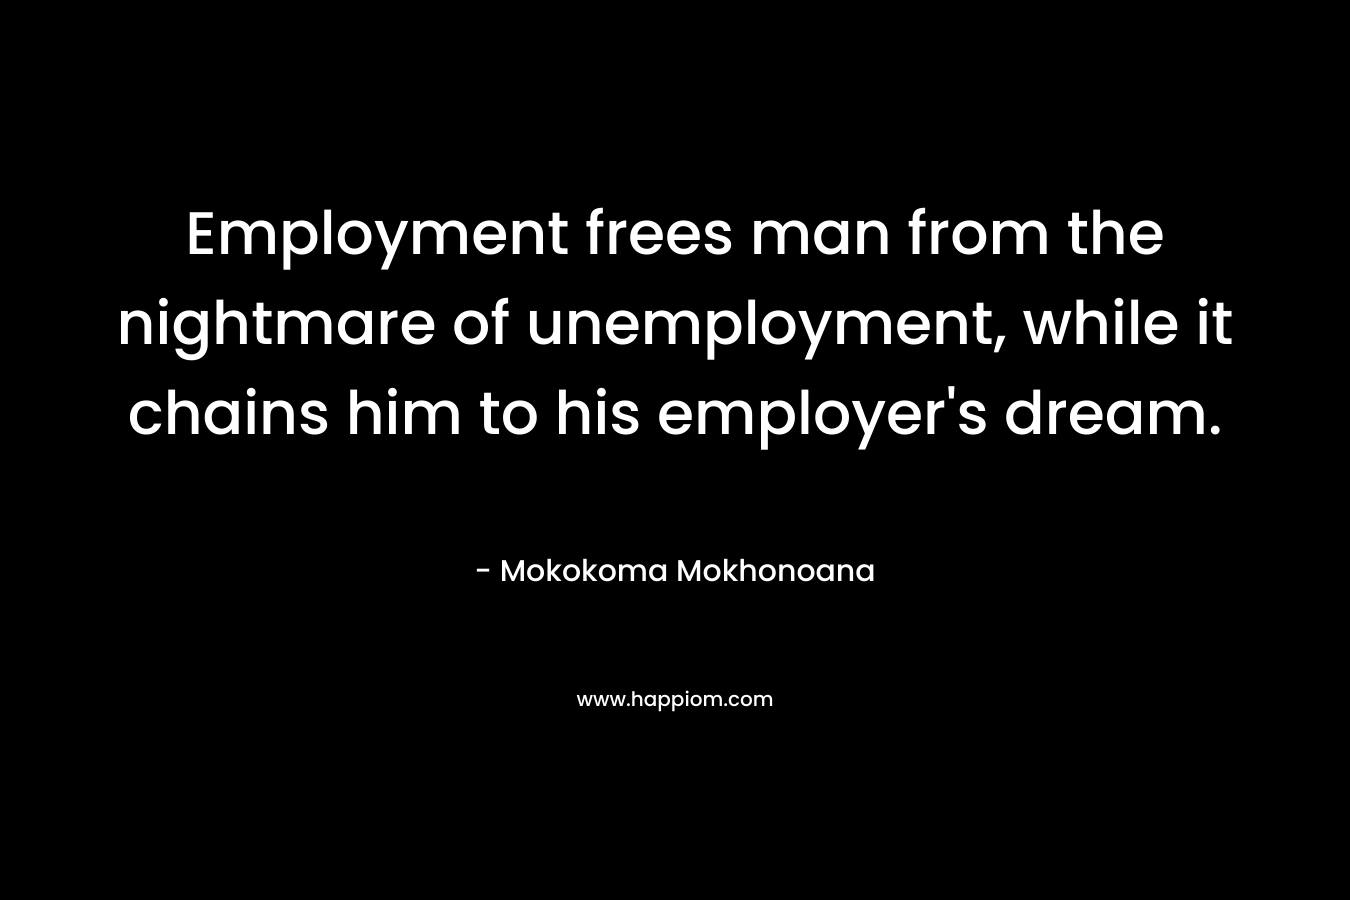 Employment frees man from the nightmare of unemployment, while it chains him to his employer’s dream. – Mokokoma Mokhonoana